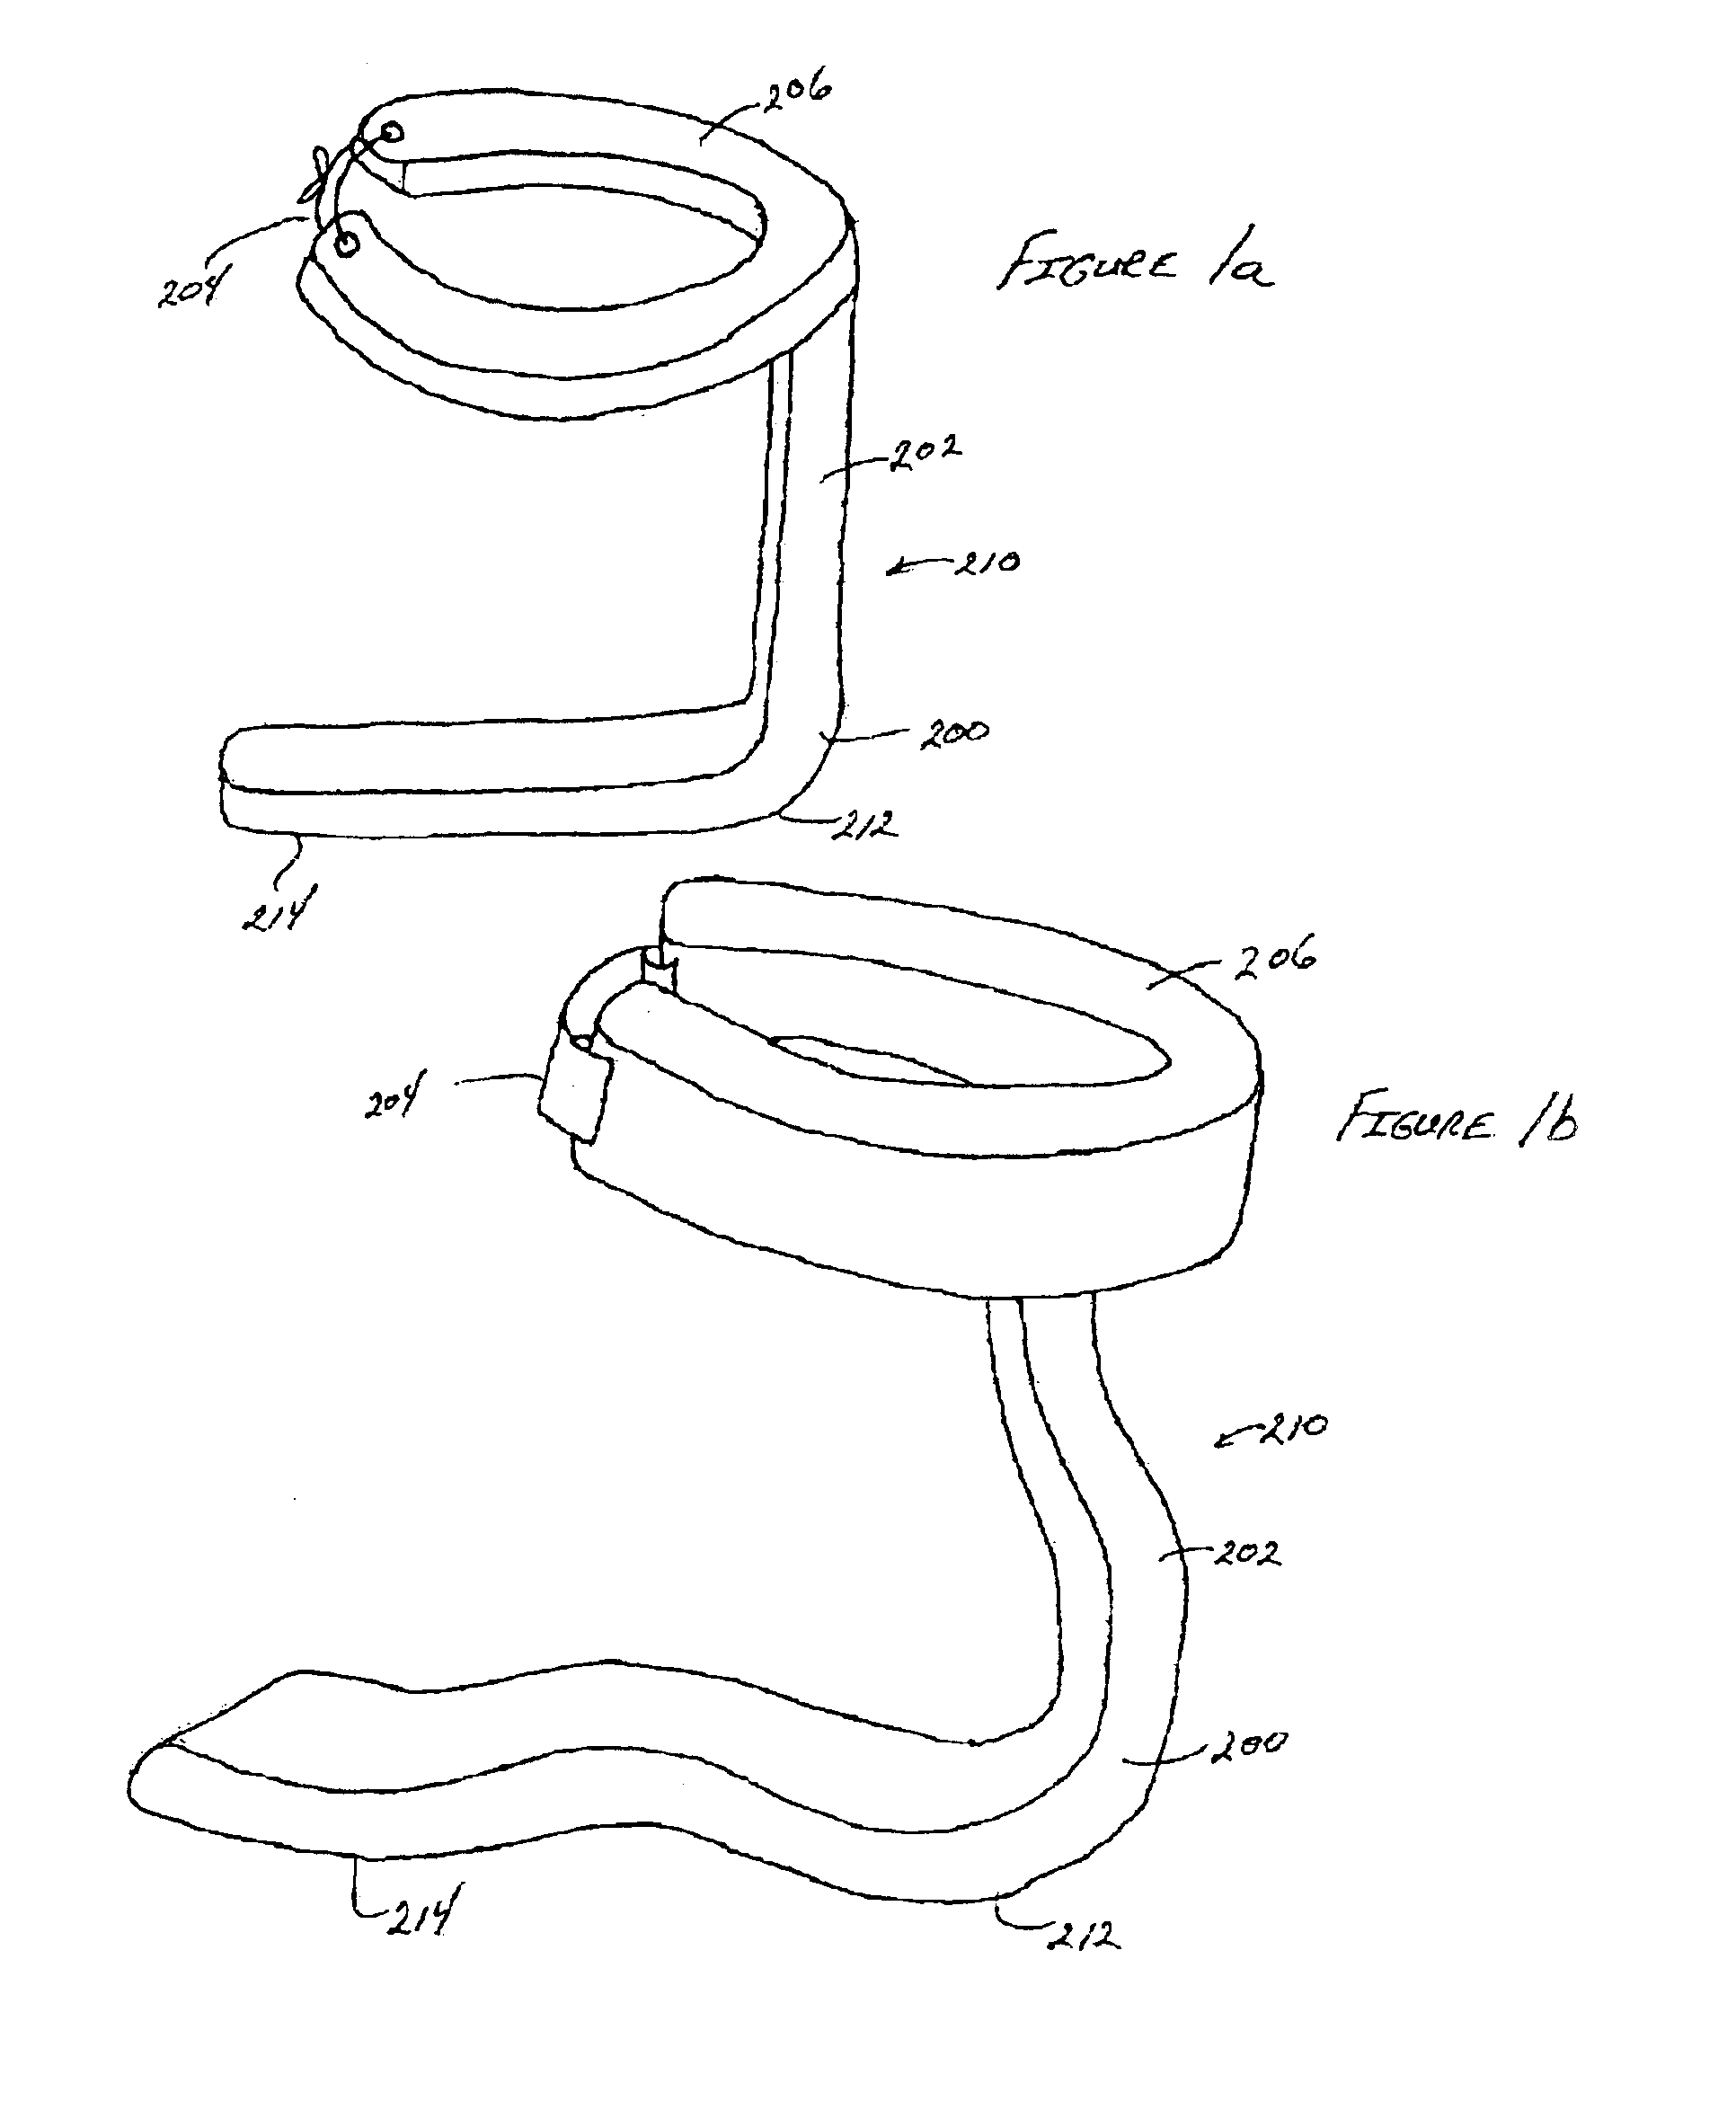 Artificial limbs incorporating superelastic supports